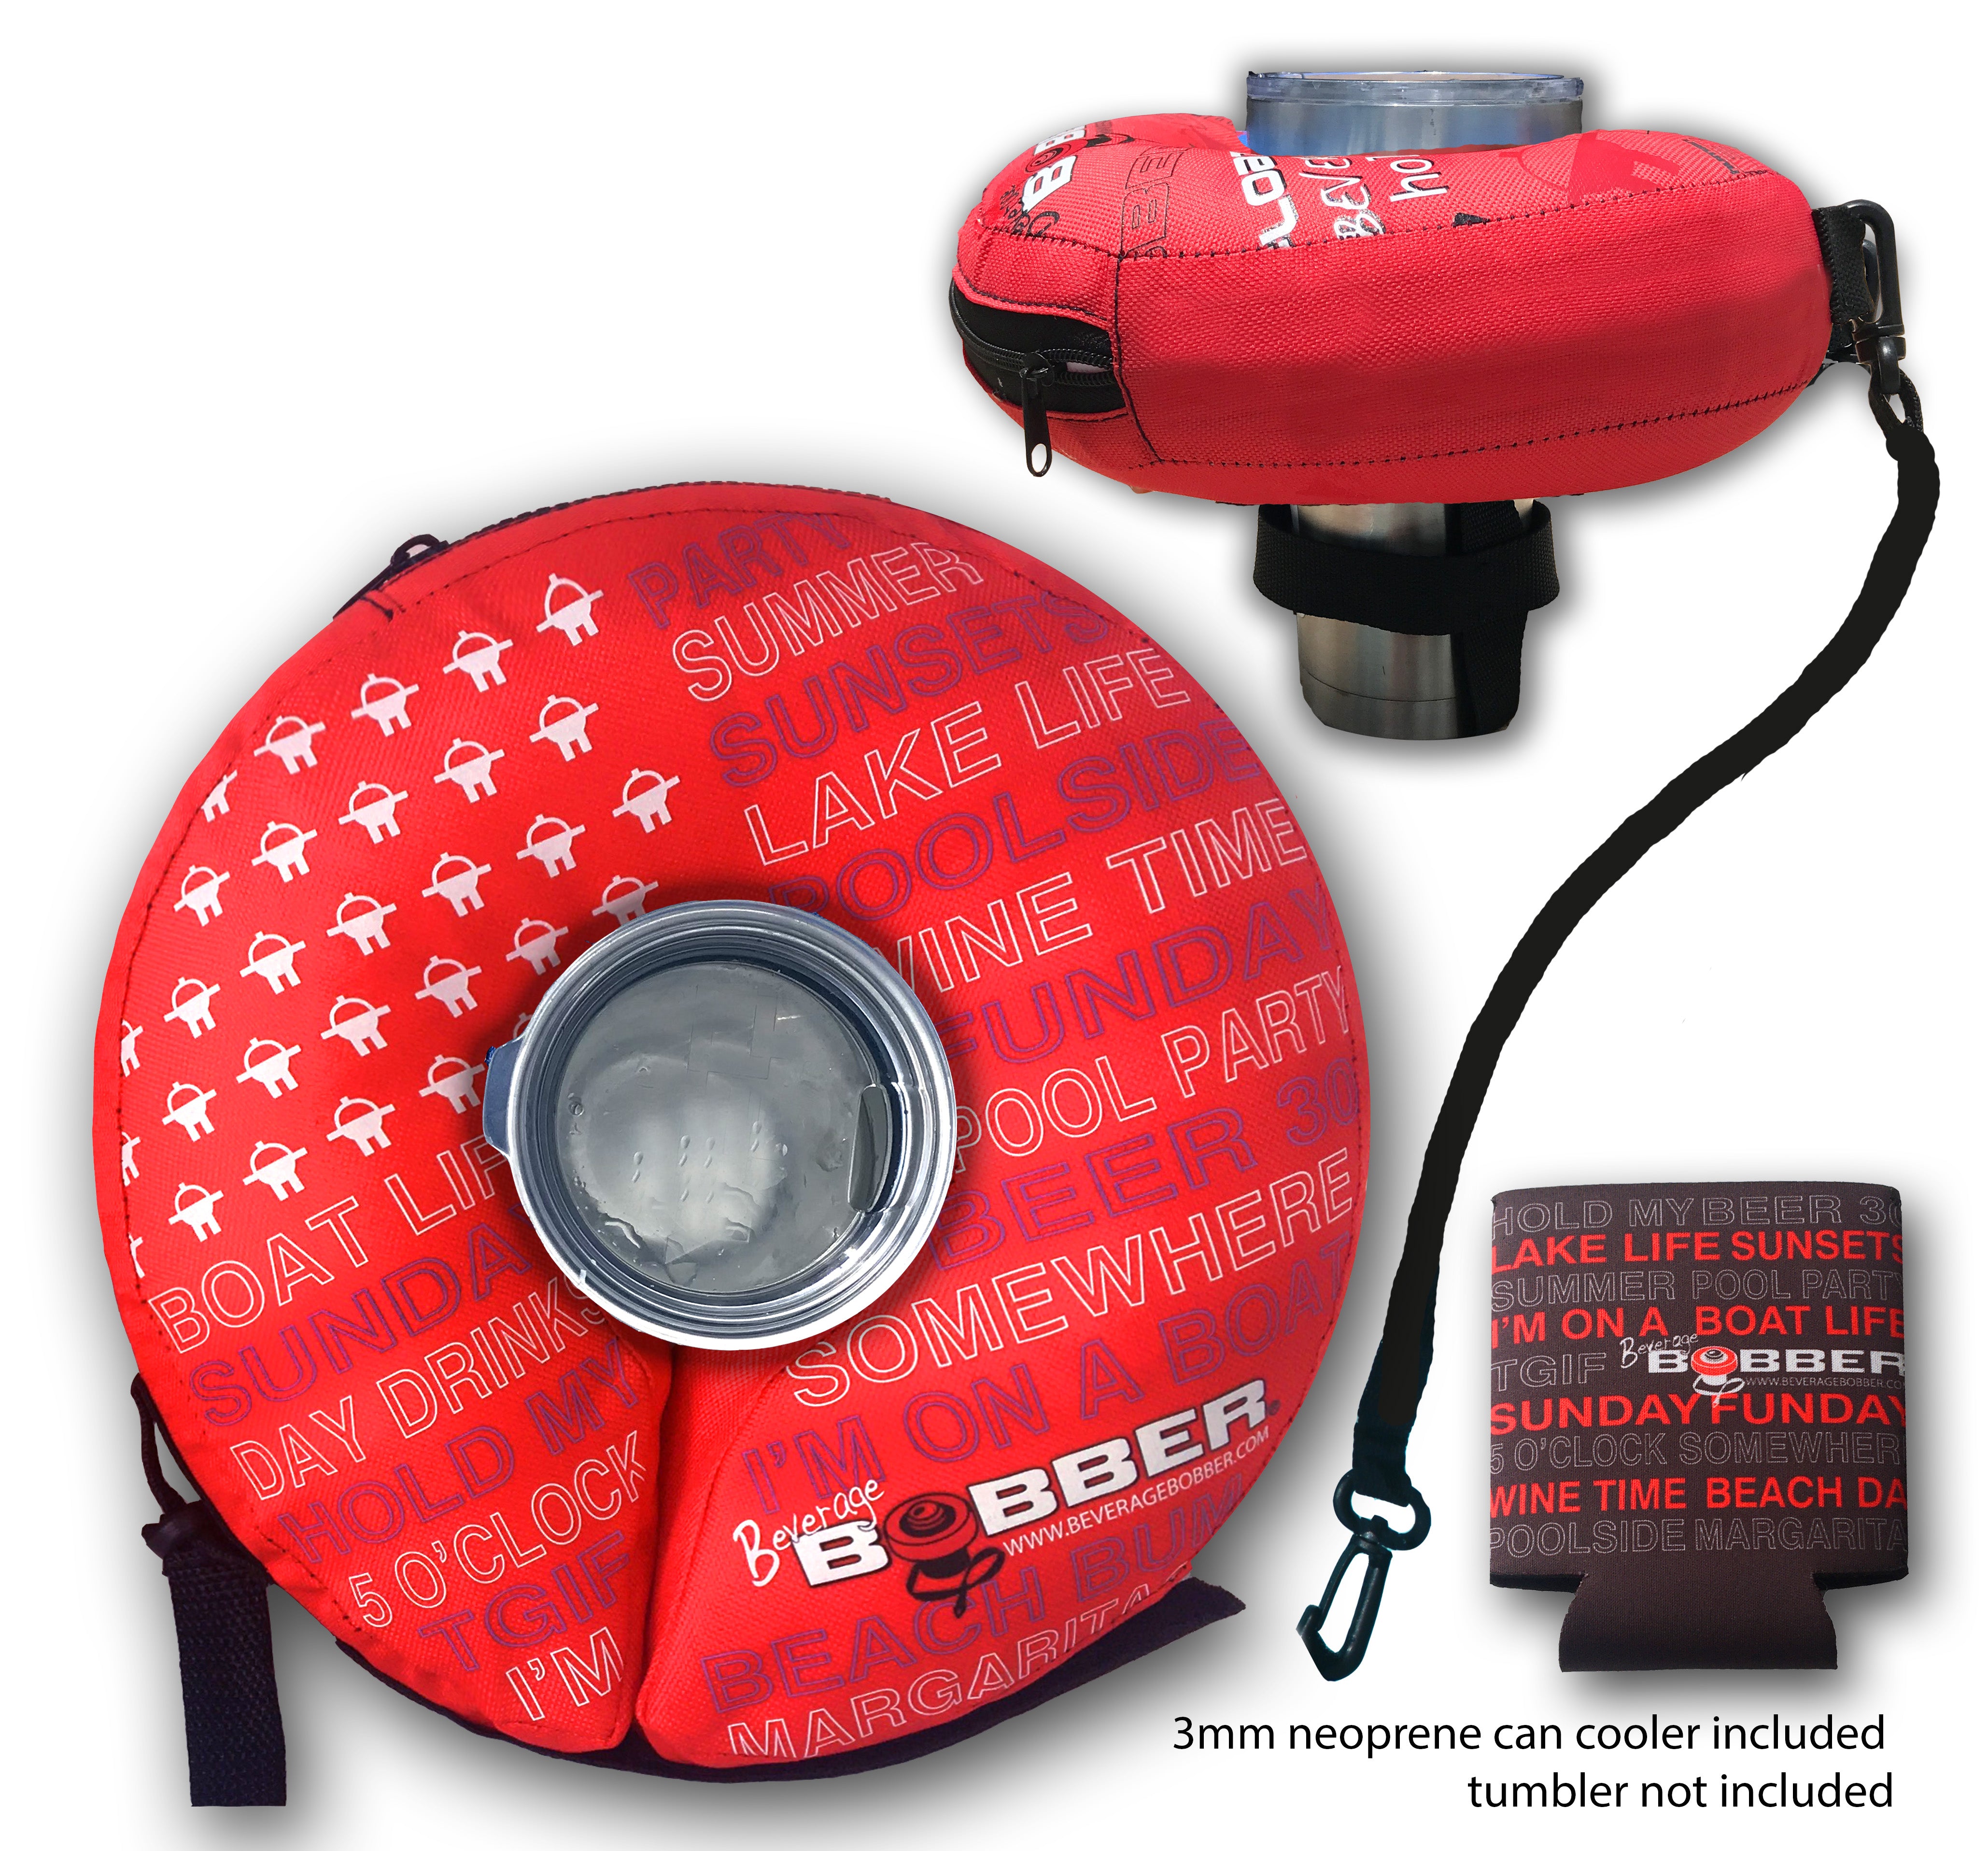 The Big Bobber Floating Cooler -Boating/Fishing/Pool Party Holds